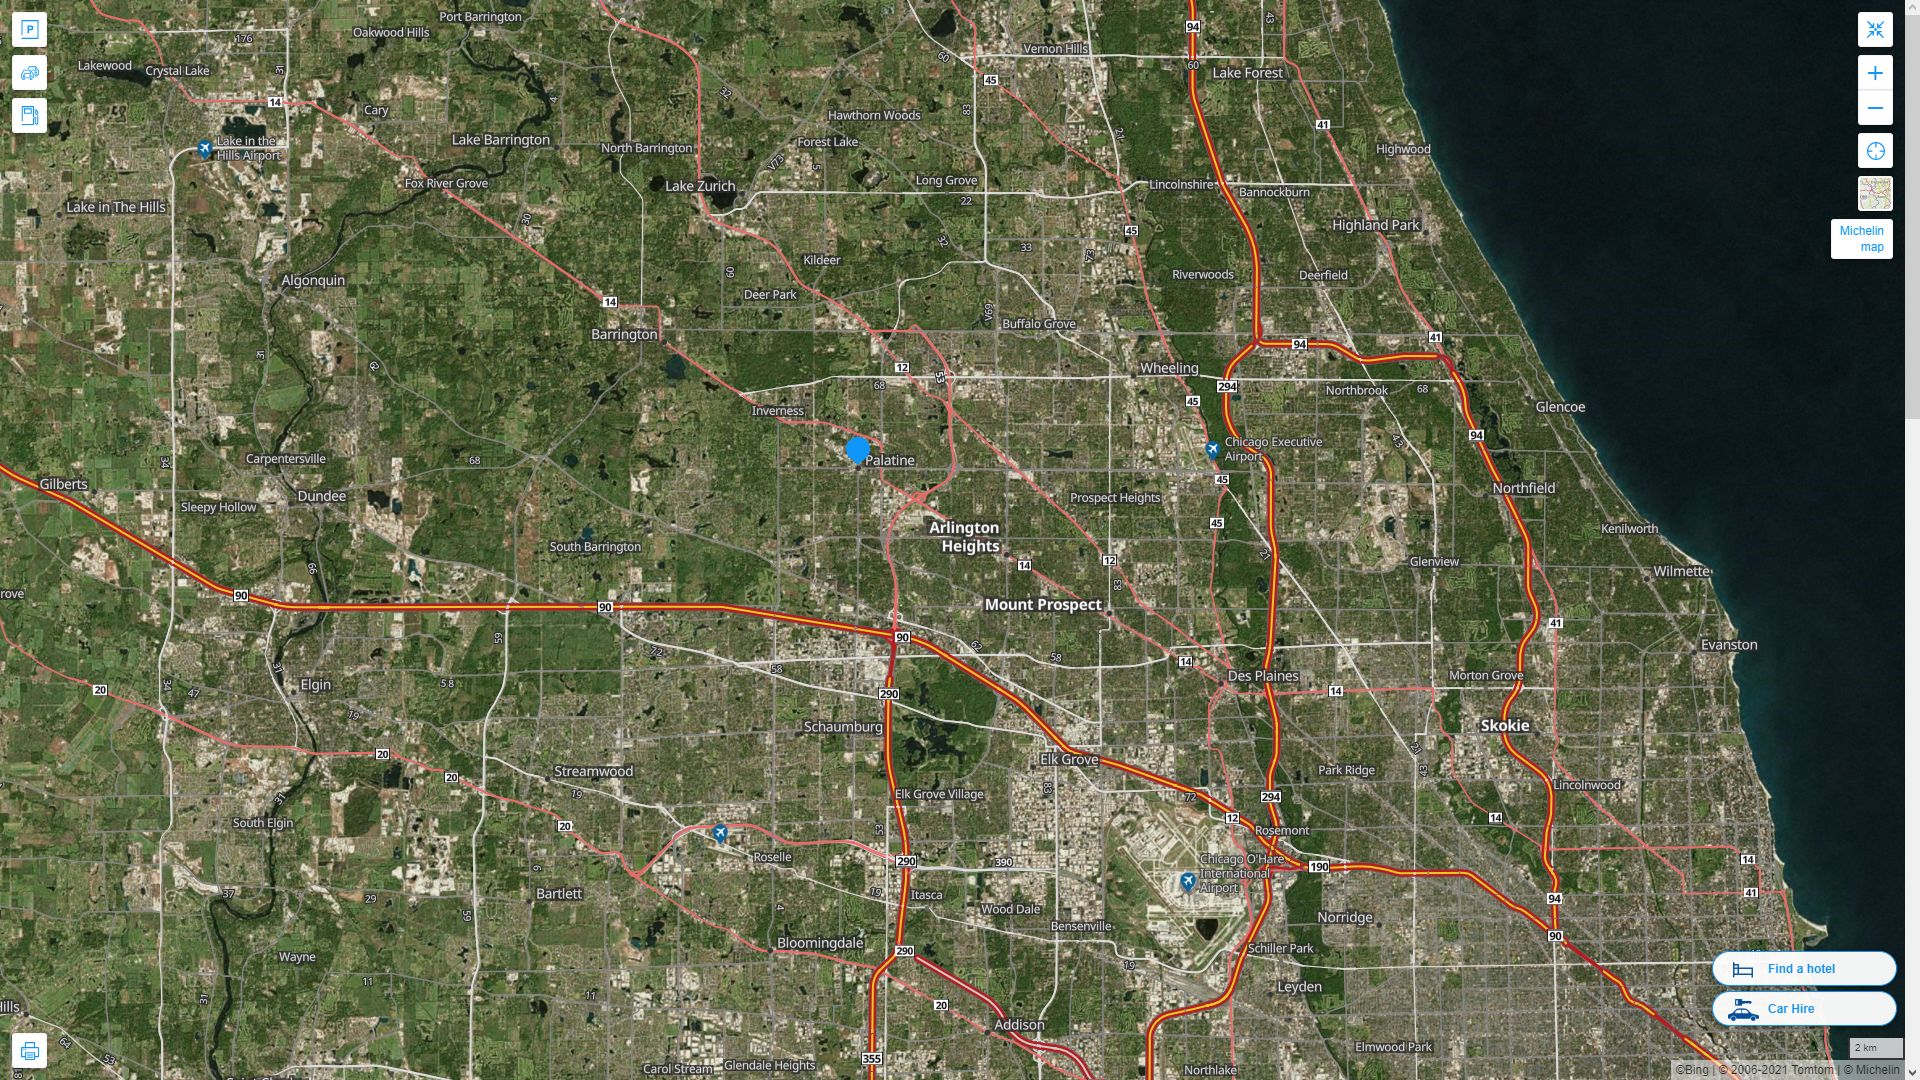 Palatine illinois Highway and Road Map with Satellite View